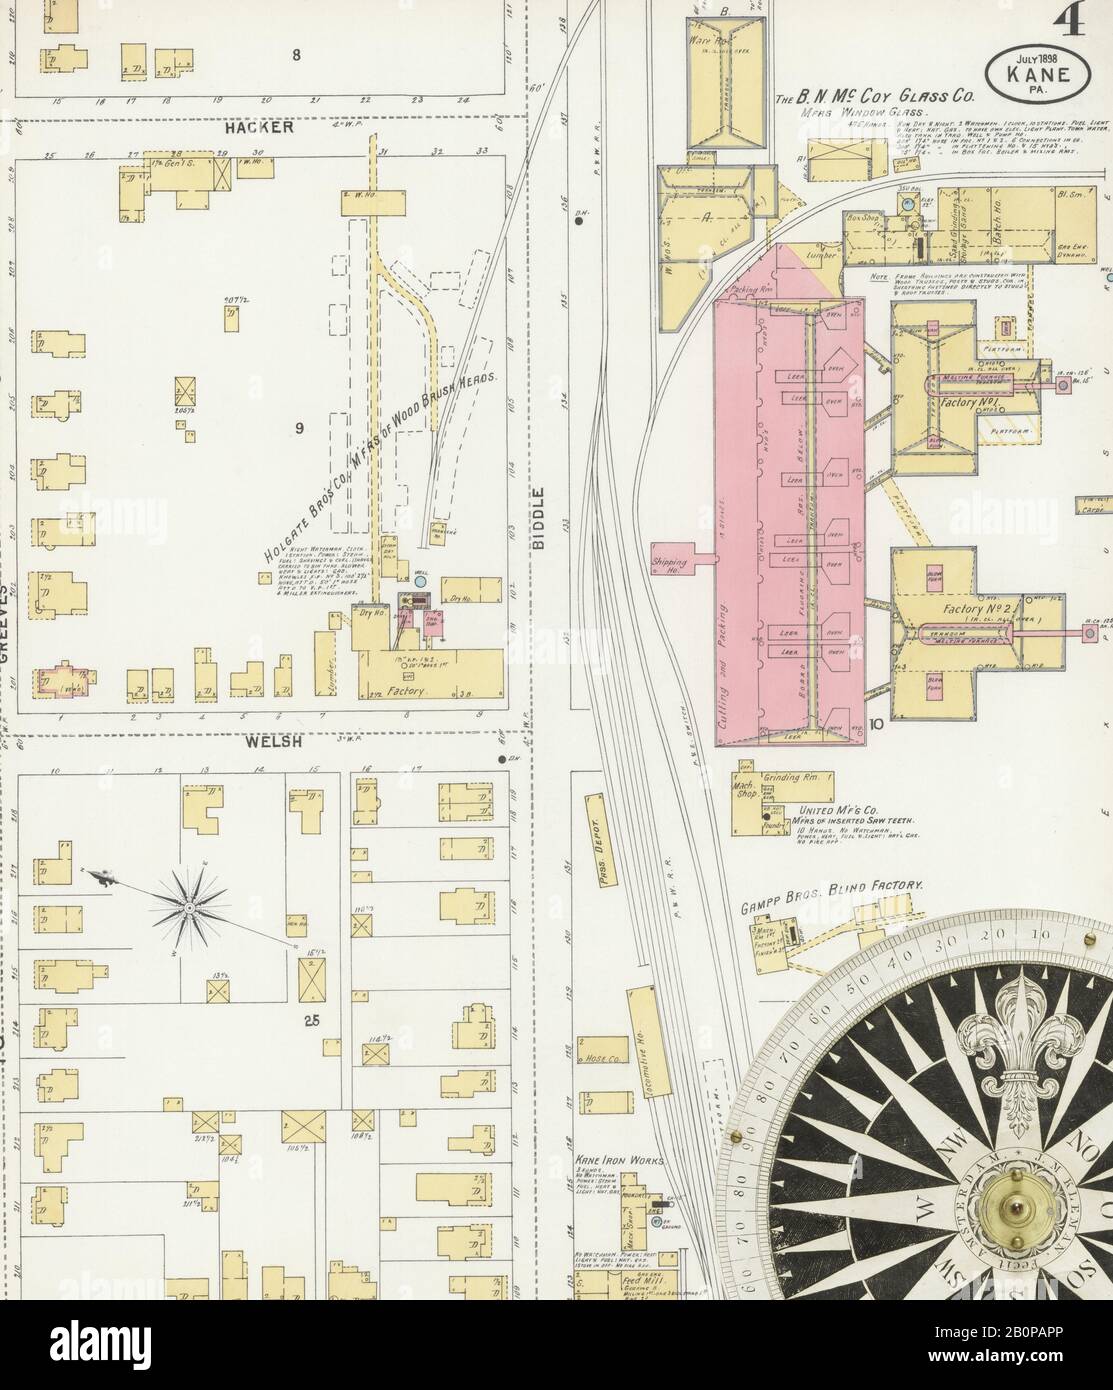 Image 4 of Sanborn Fire Insurance Map from Kane, McKean County, Pennsylvania. Jul 1898. 6 Sheet(s), America, street map with a Nineteenth Century compass Stock Photo